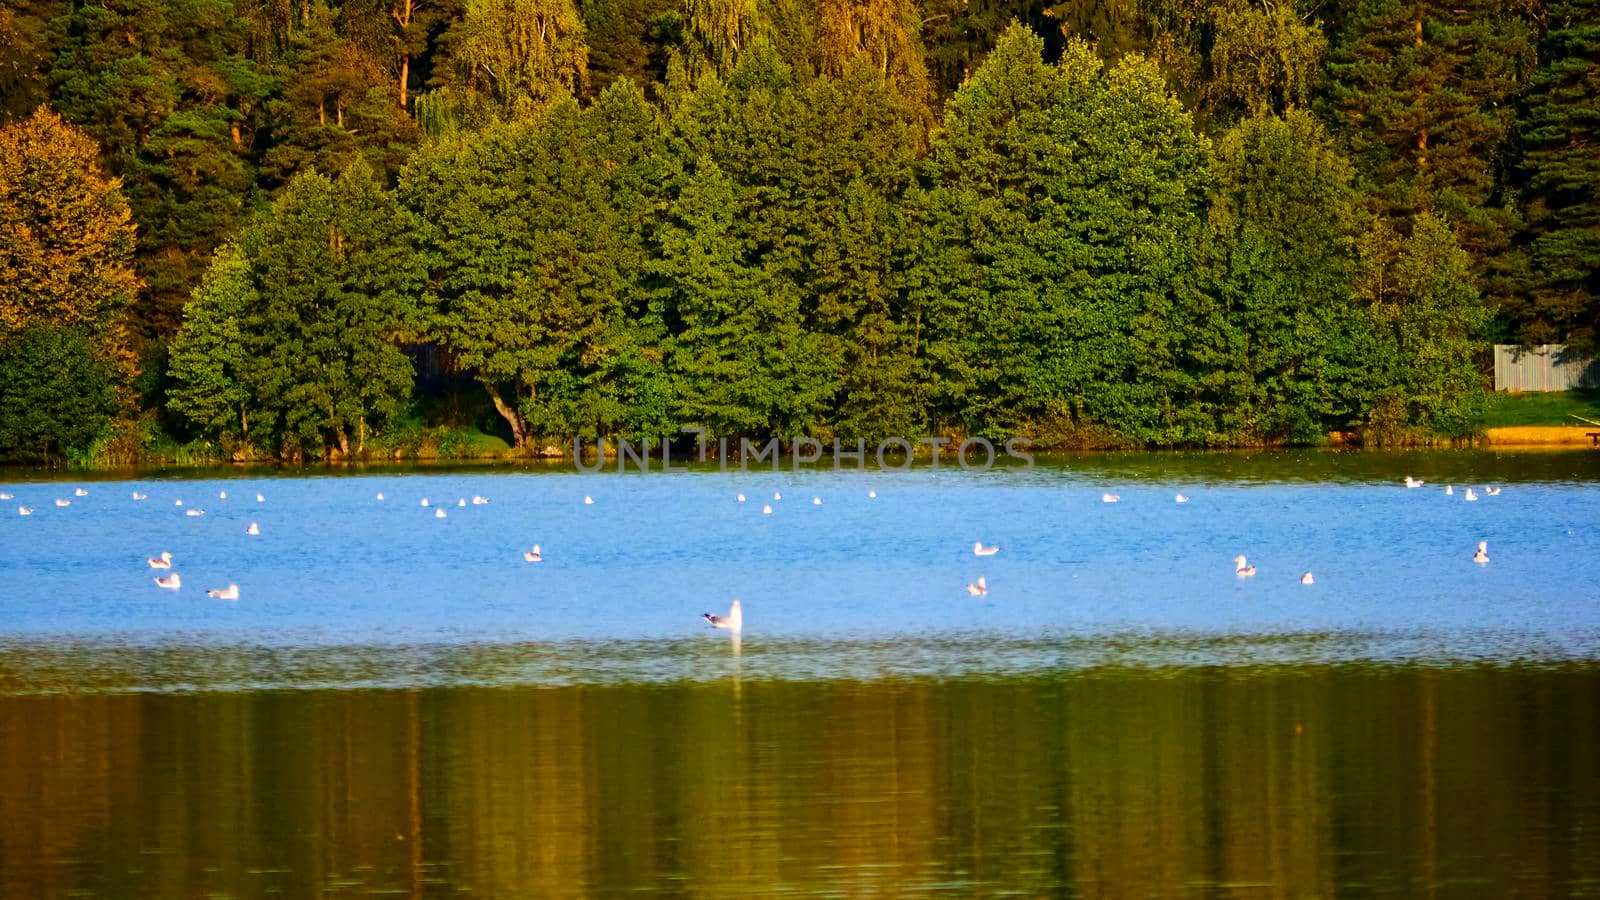 birds swim in the pond against the backdrop of the autumn forest. color nature by lempro